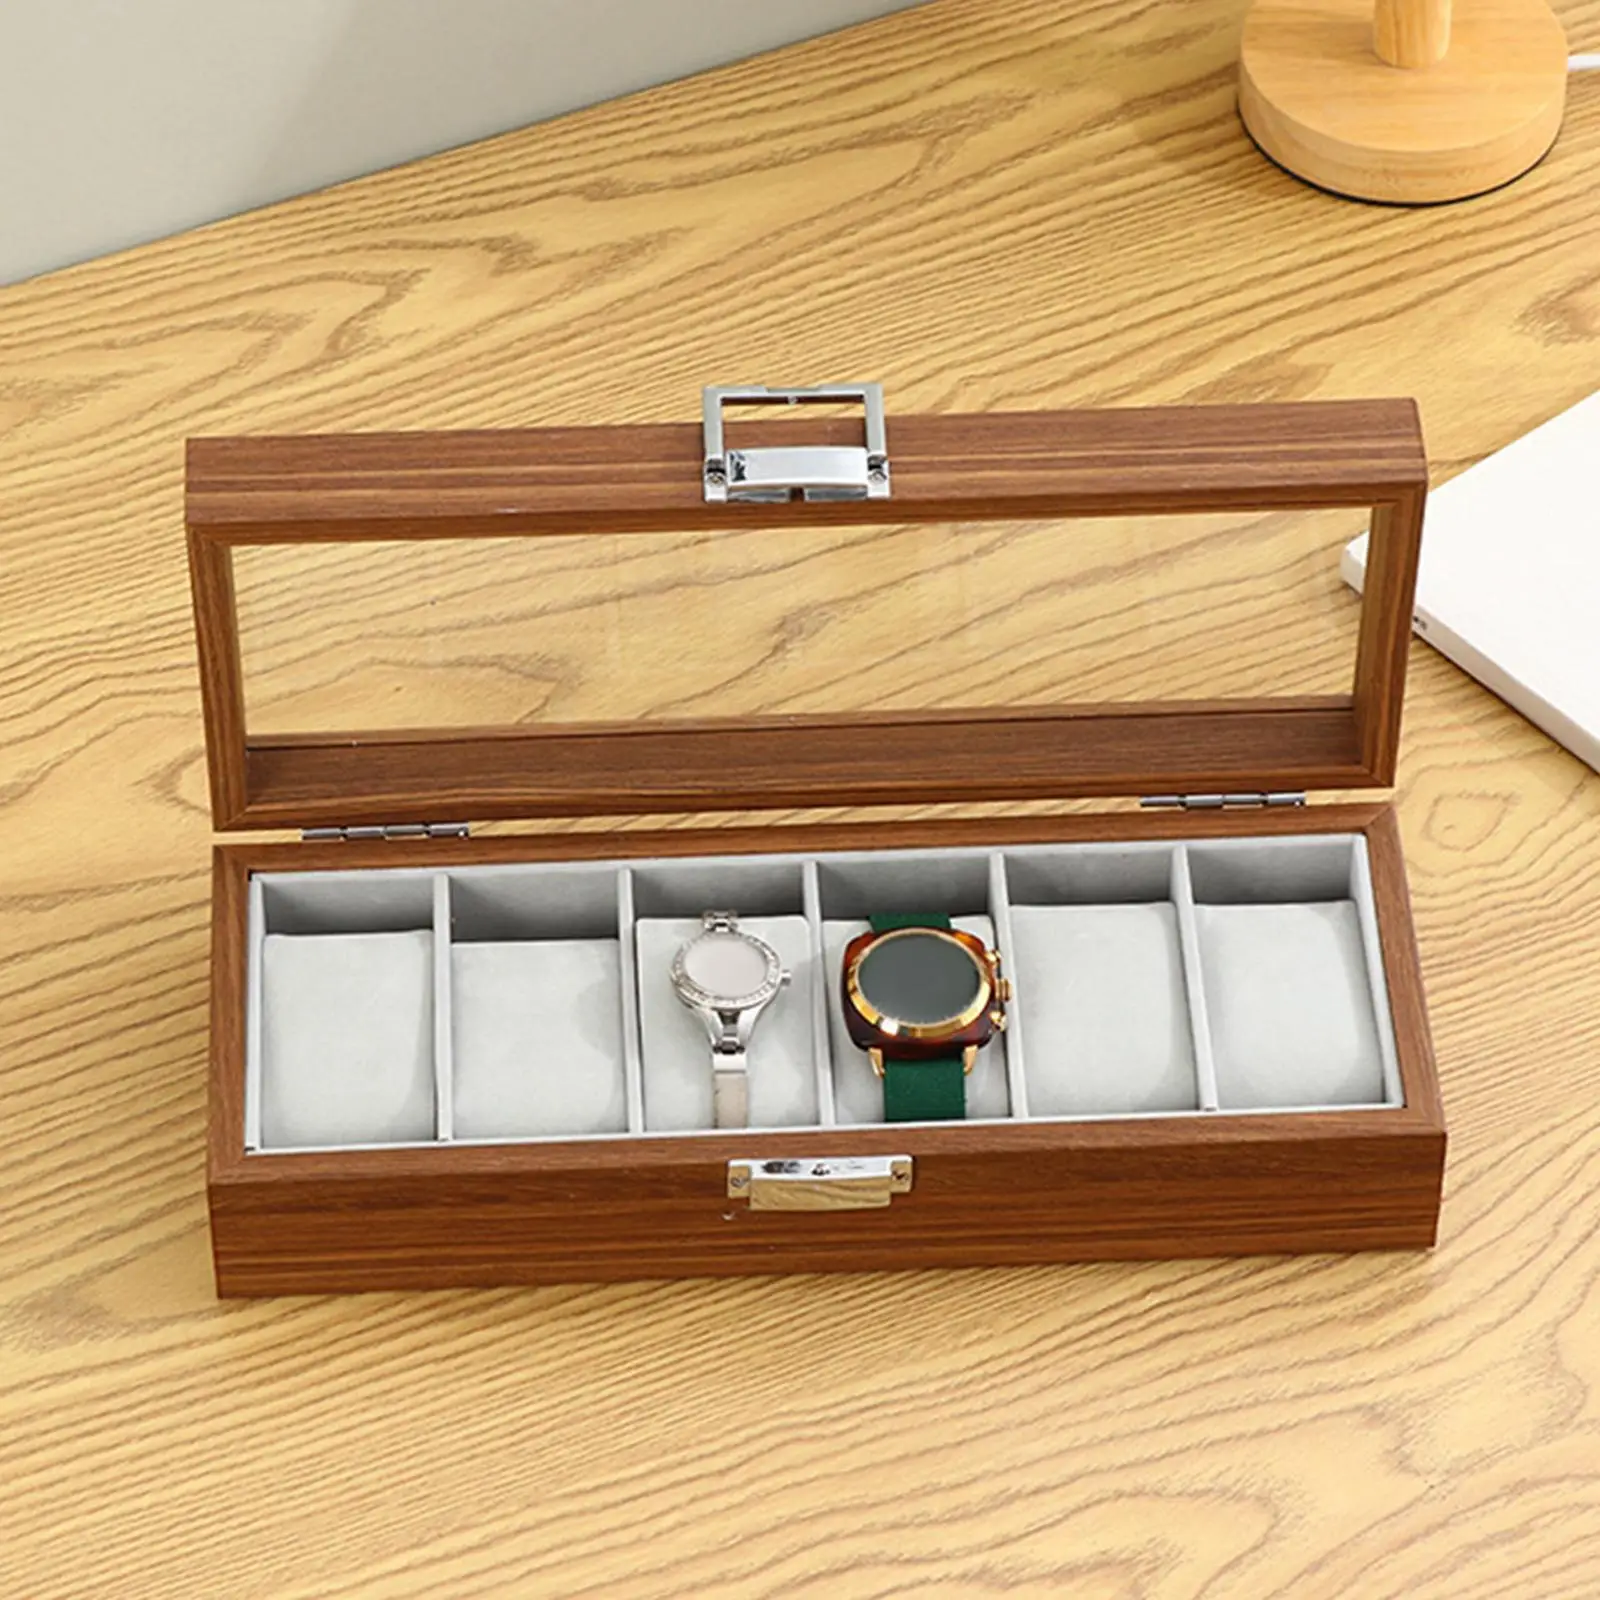 Watch Storage Box 6 Wide Slots Wood Watch Box for Men Women Home Decoration Watches Jewelry Display Table Dresser Shop Display